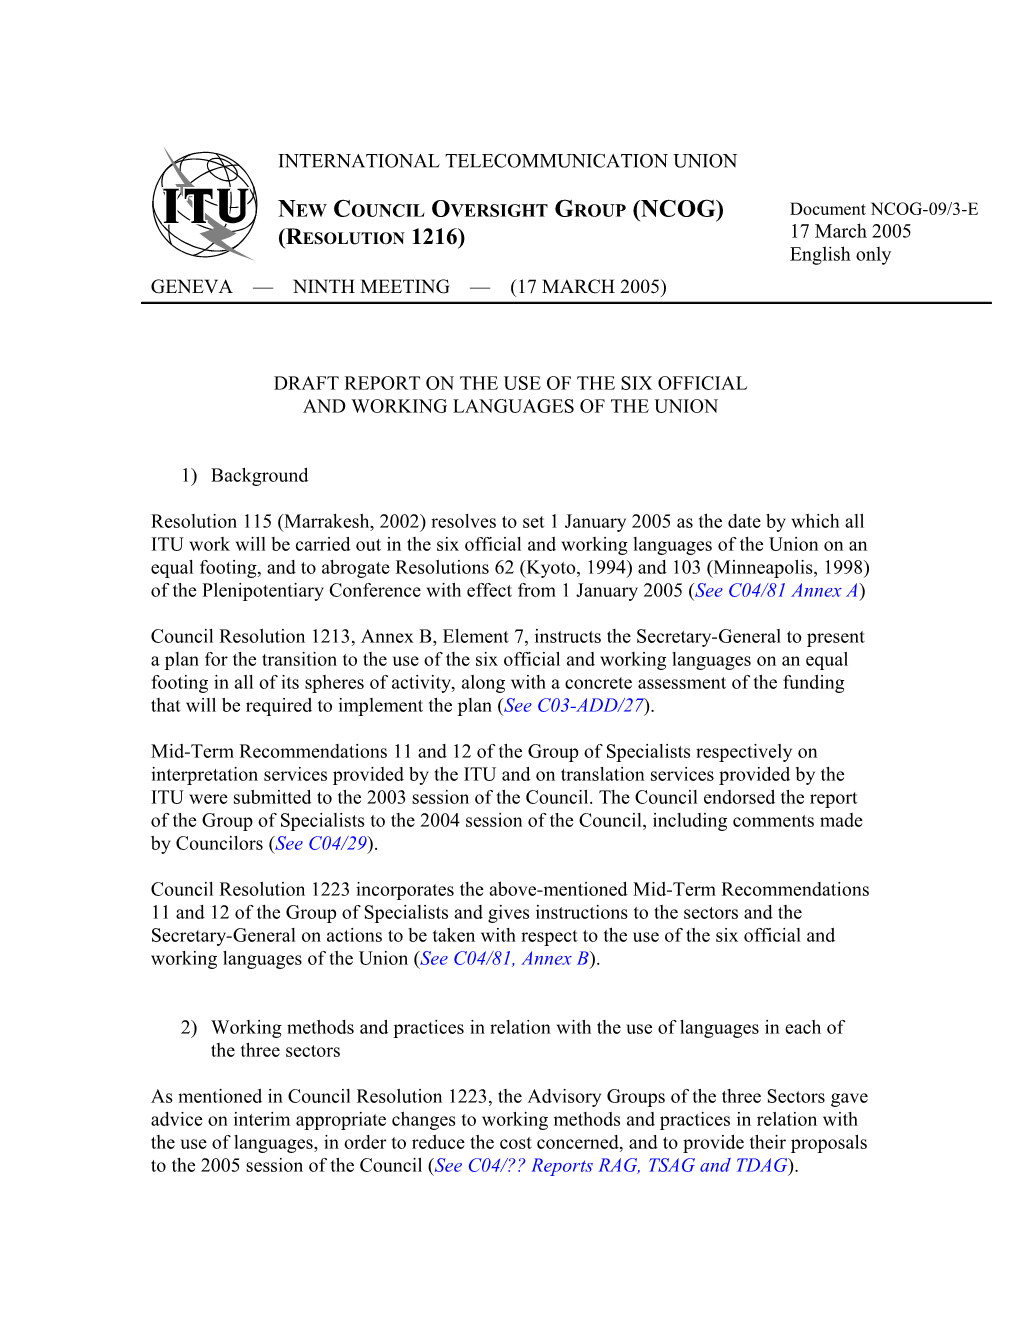 Draft Report on the Use of the Six Official